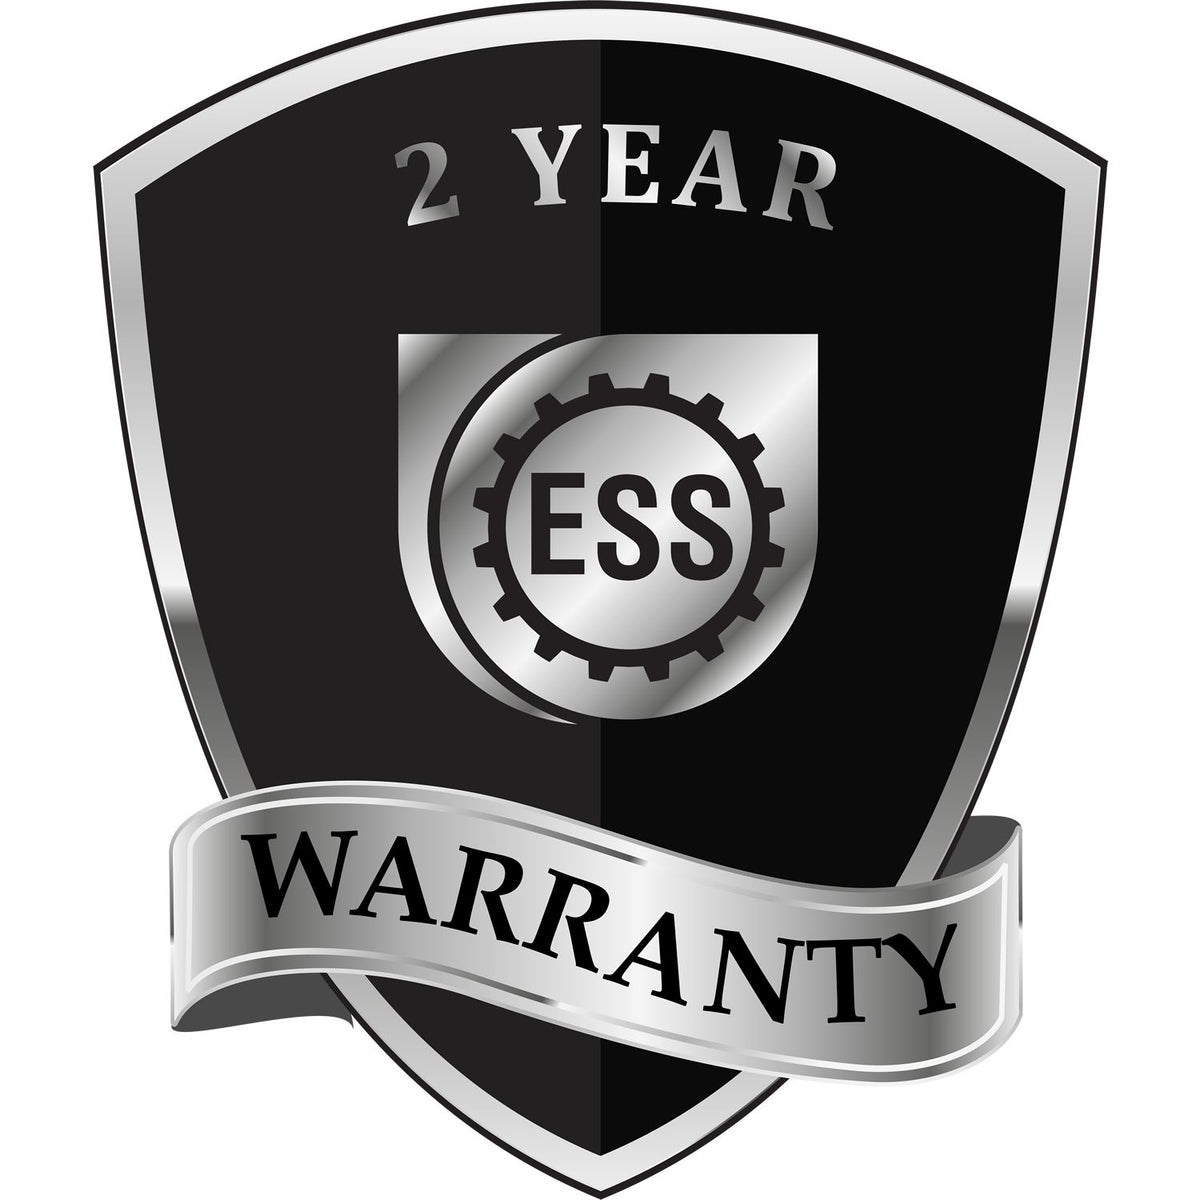 A black and silver badge or emblem showing warranty information for the Heavy Duty Cast Iron Pennsylvania Geologist Seal Embosser